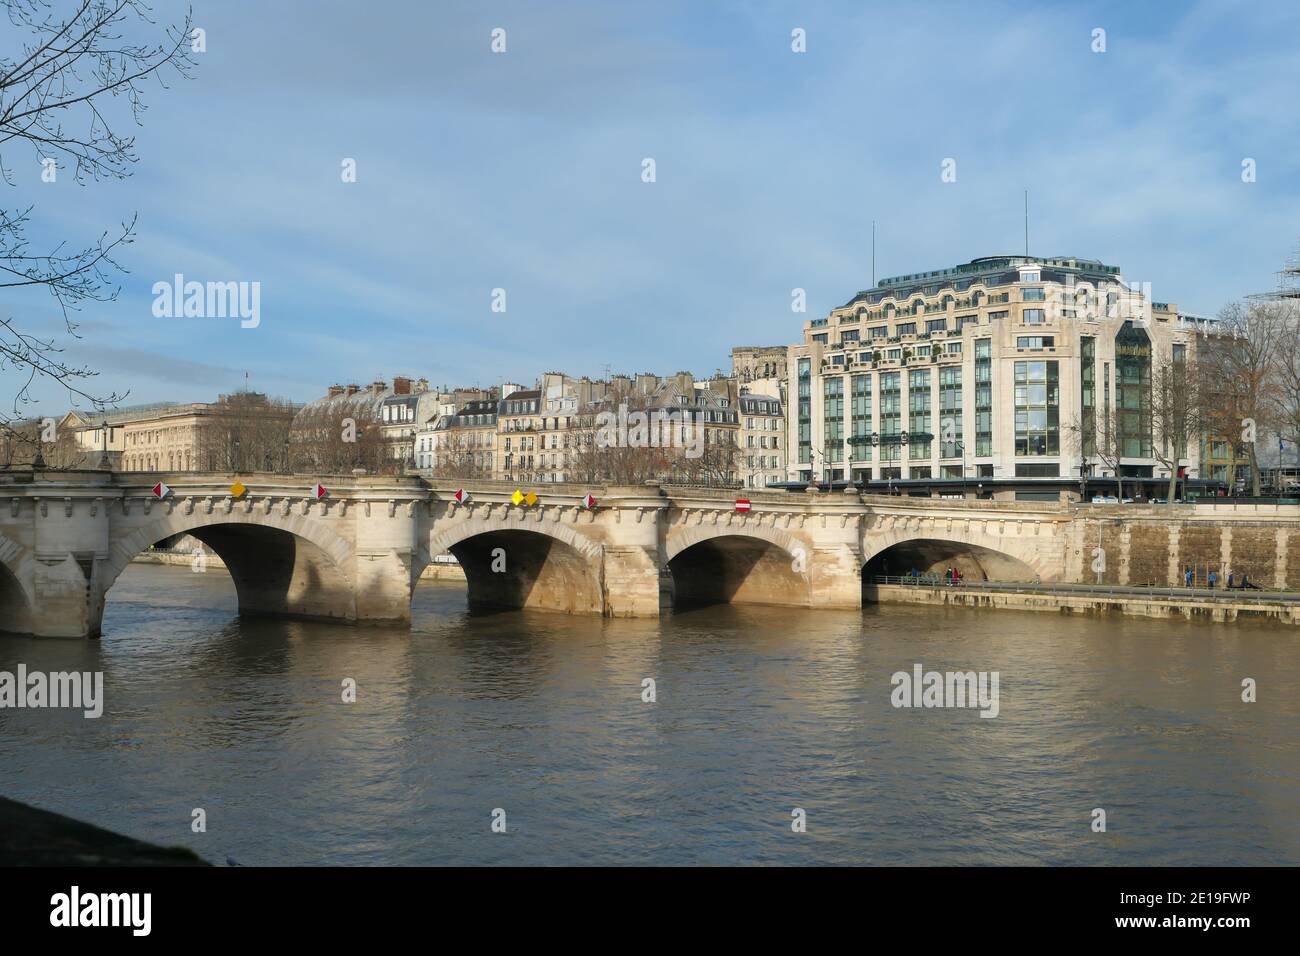 Paris, France. December 30. 2020. View of the building of the Samaritaine department store. Pont Neuf in the foreground. Stock Photo